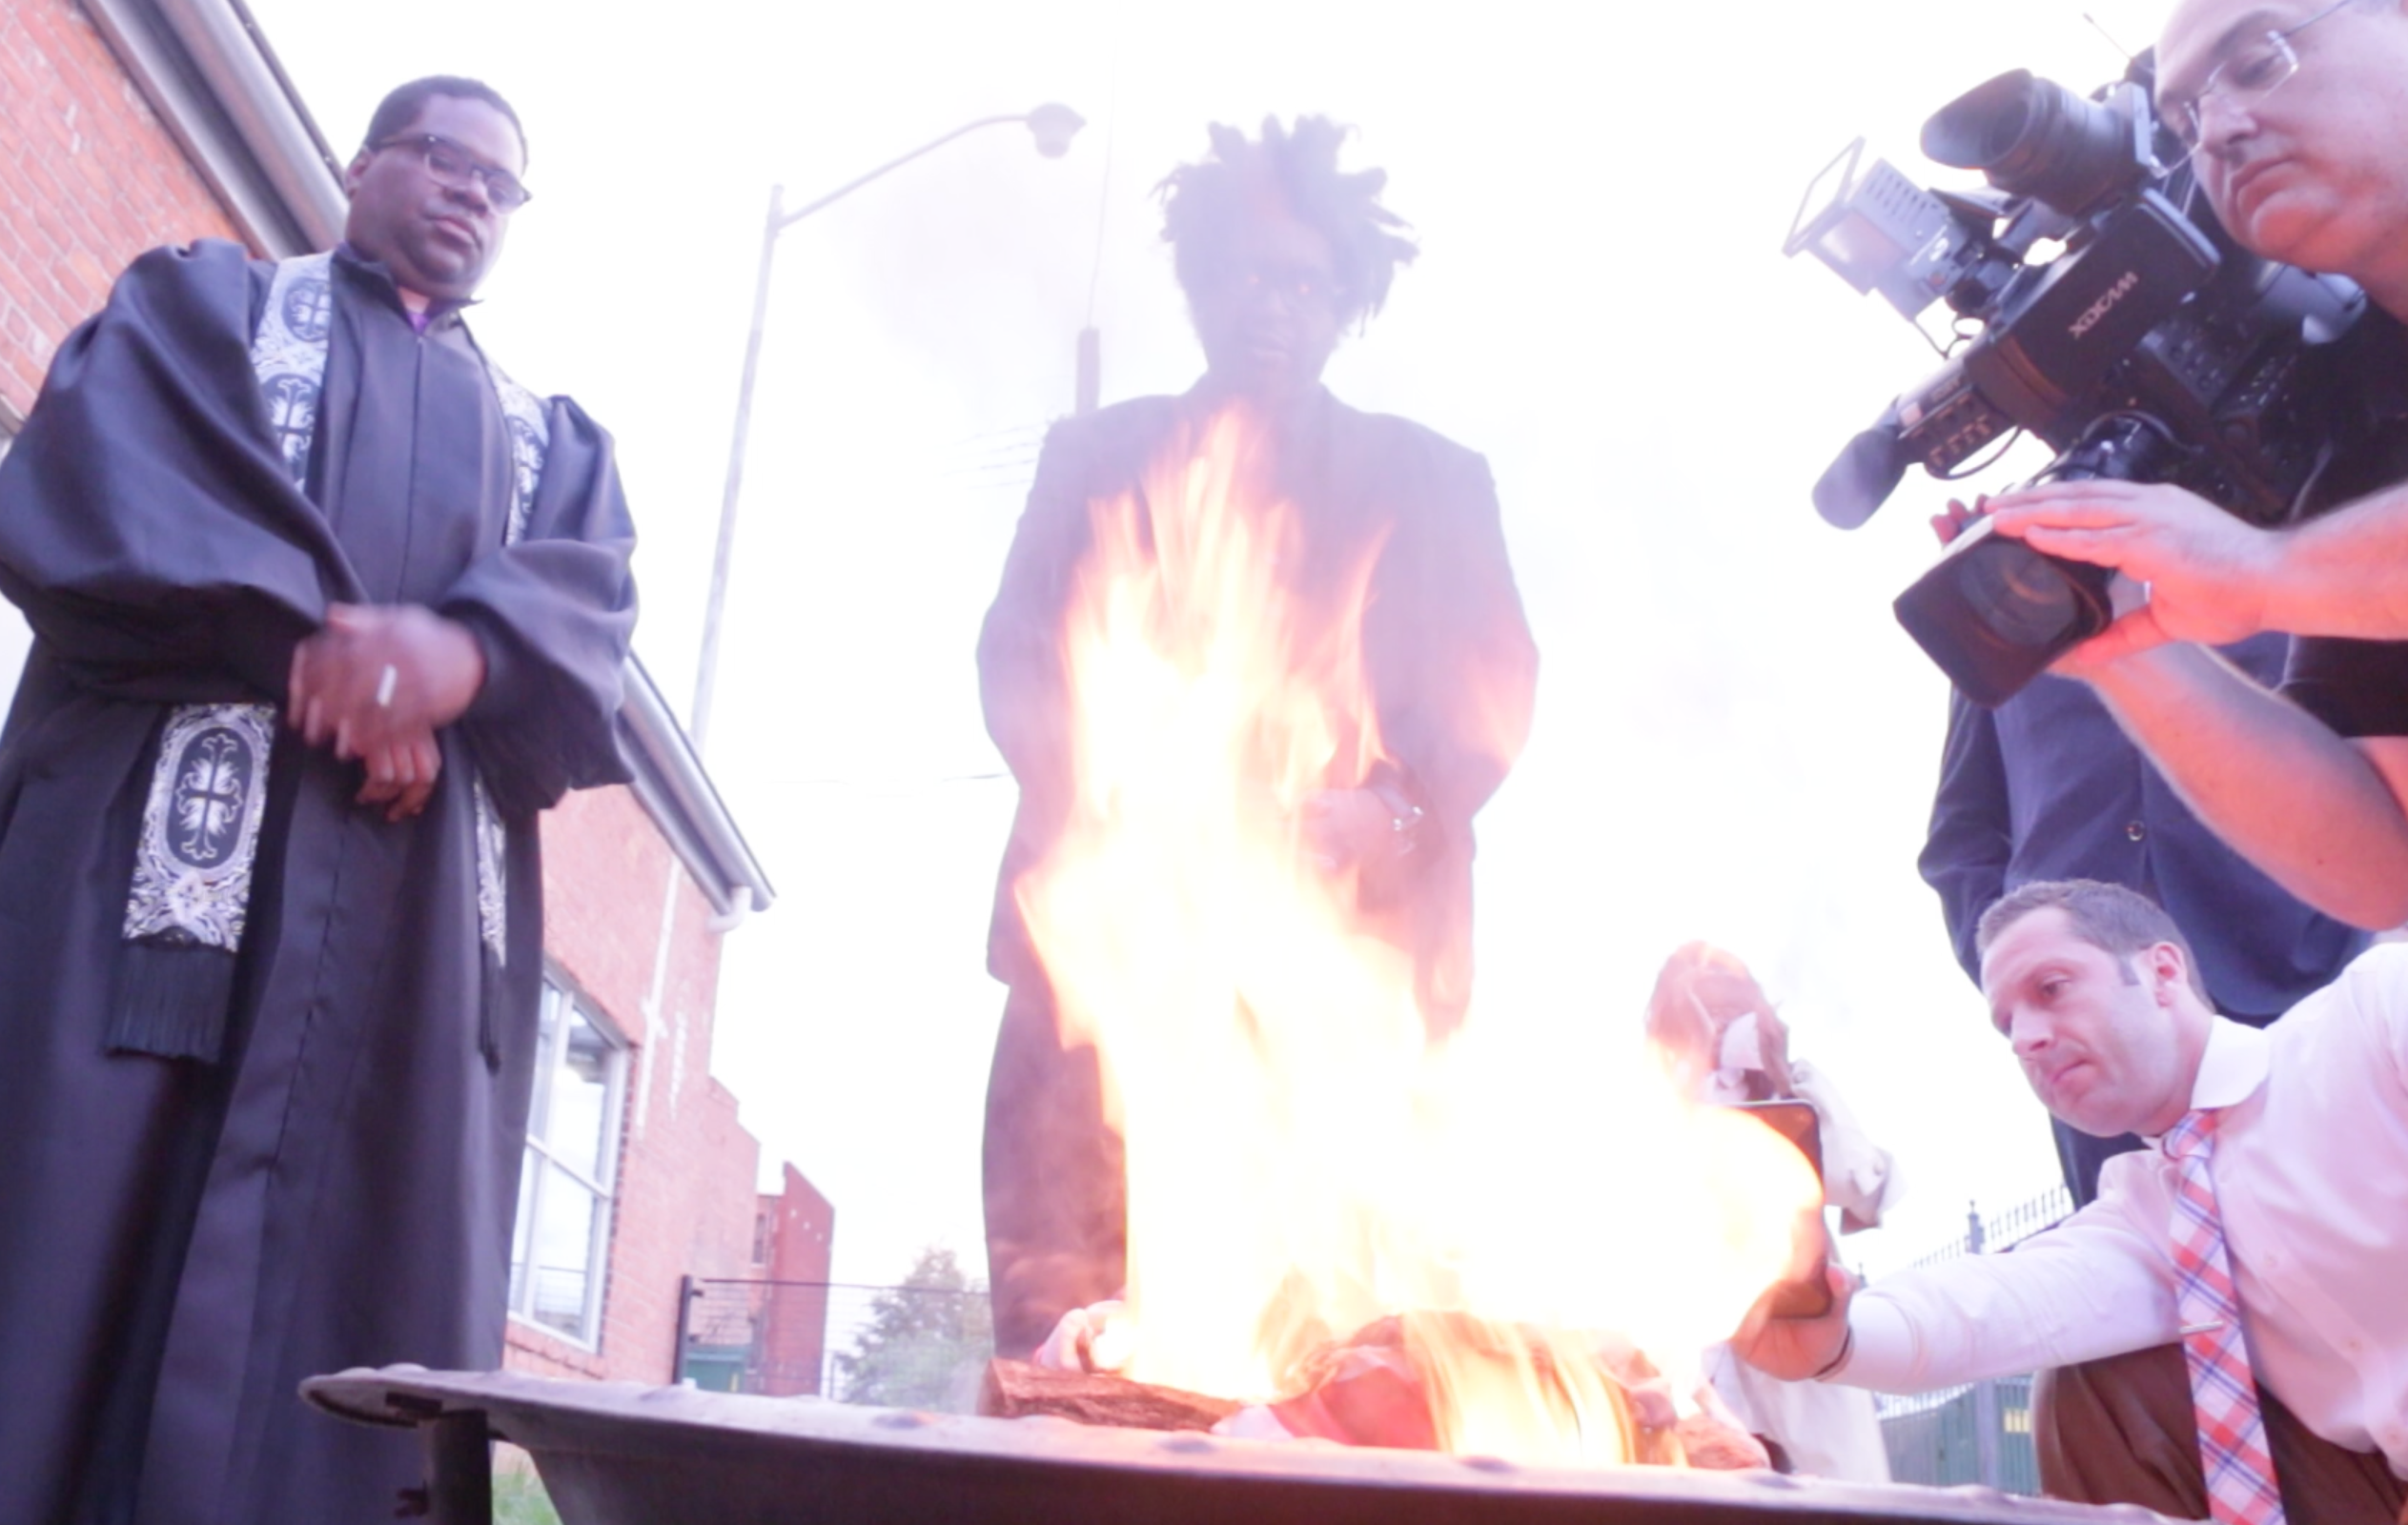 A New Memorial Day Tradition: Burn a Confederate Flag With Artist John Sims